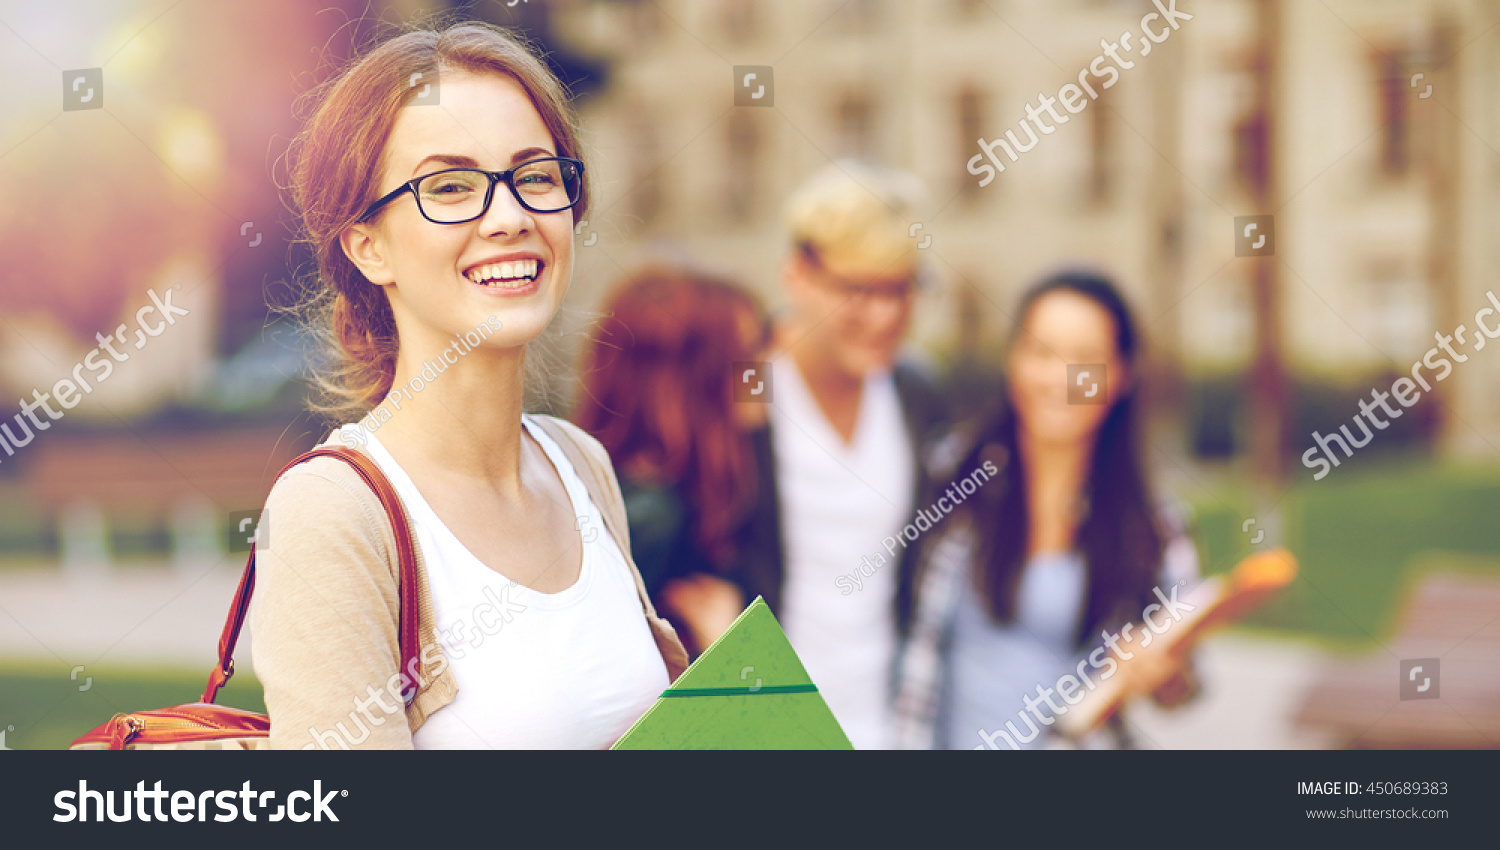 education, campus, friendship and people concept - group of happy teenage students with school folders #450689383